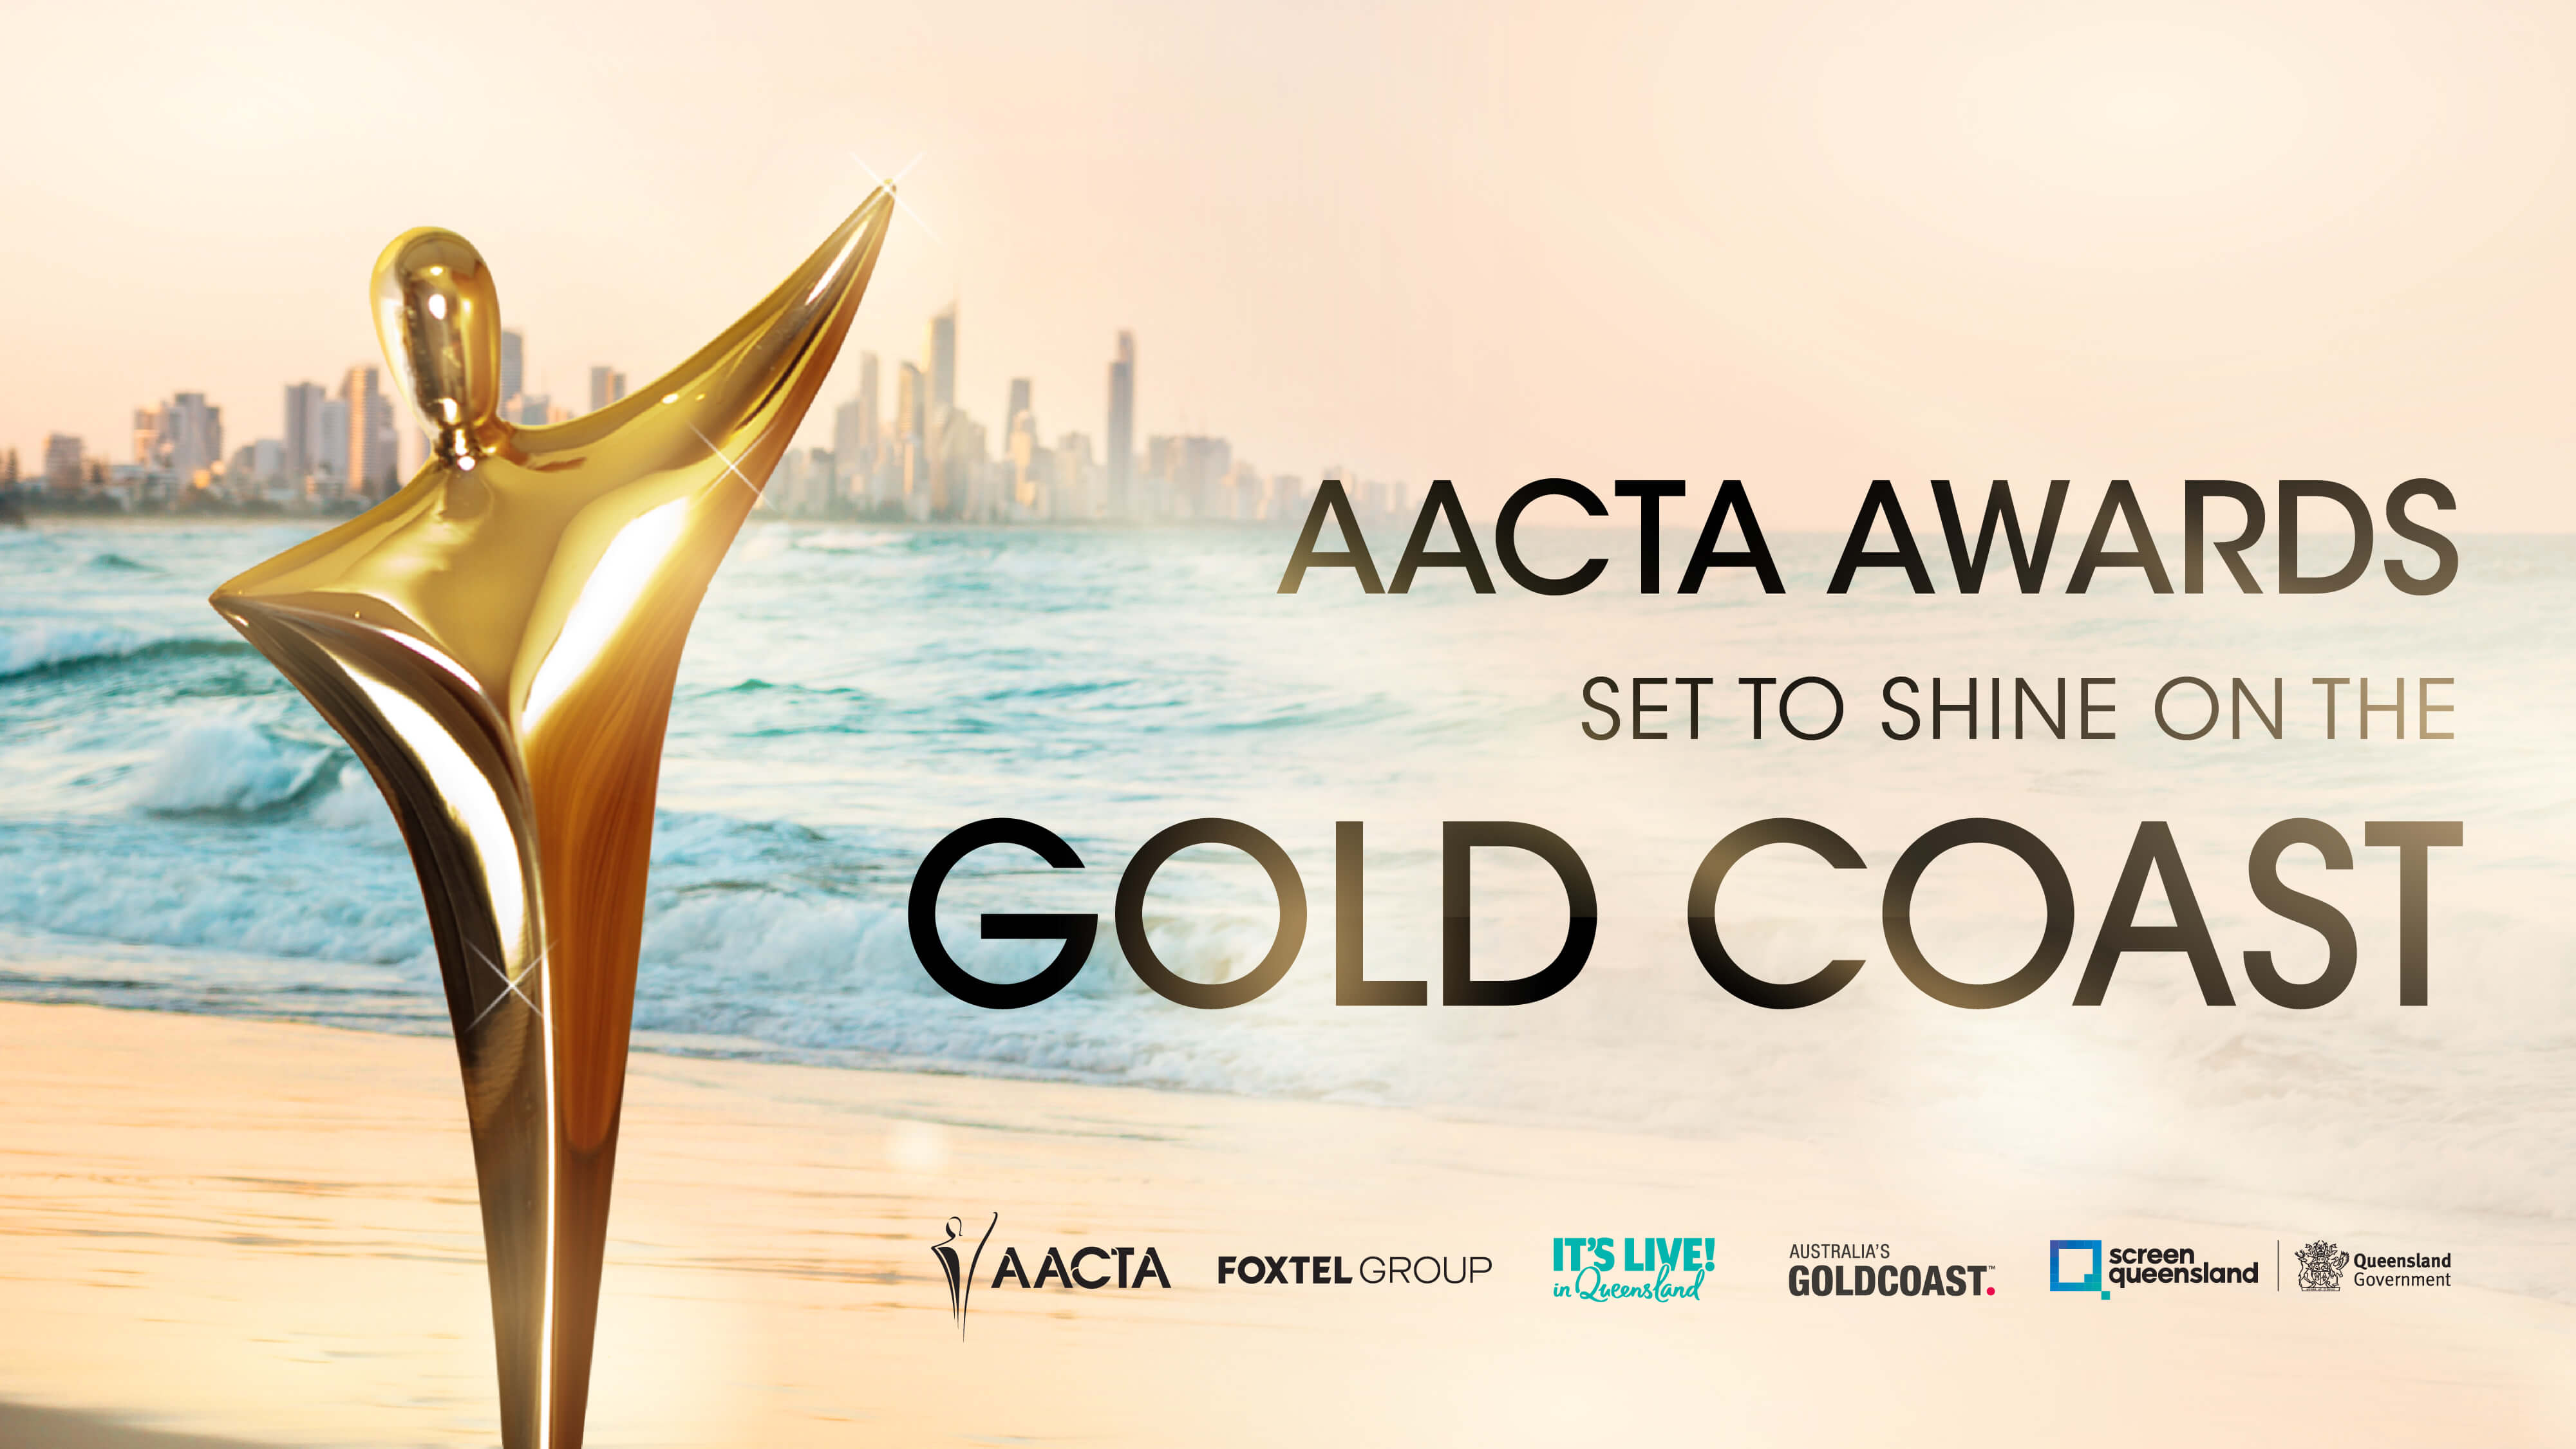 AACTA Awards move to the Gold